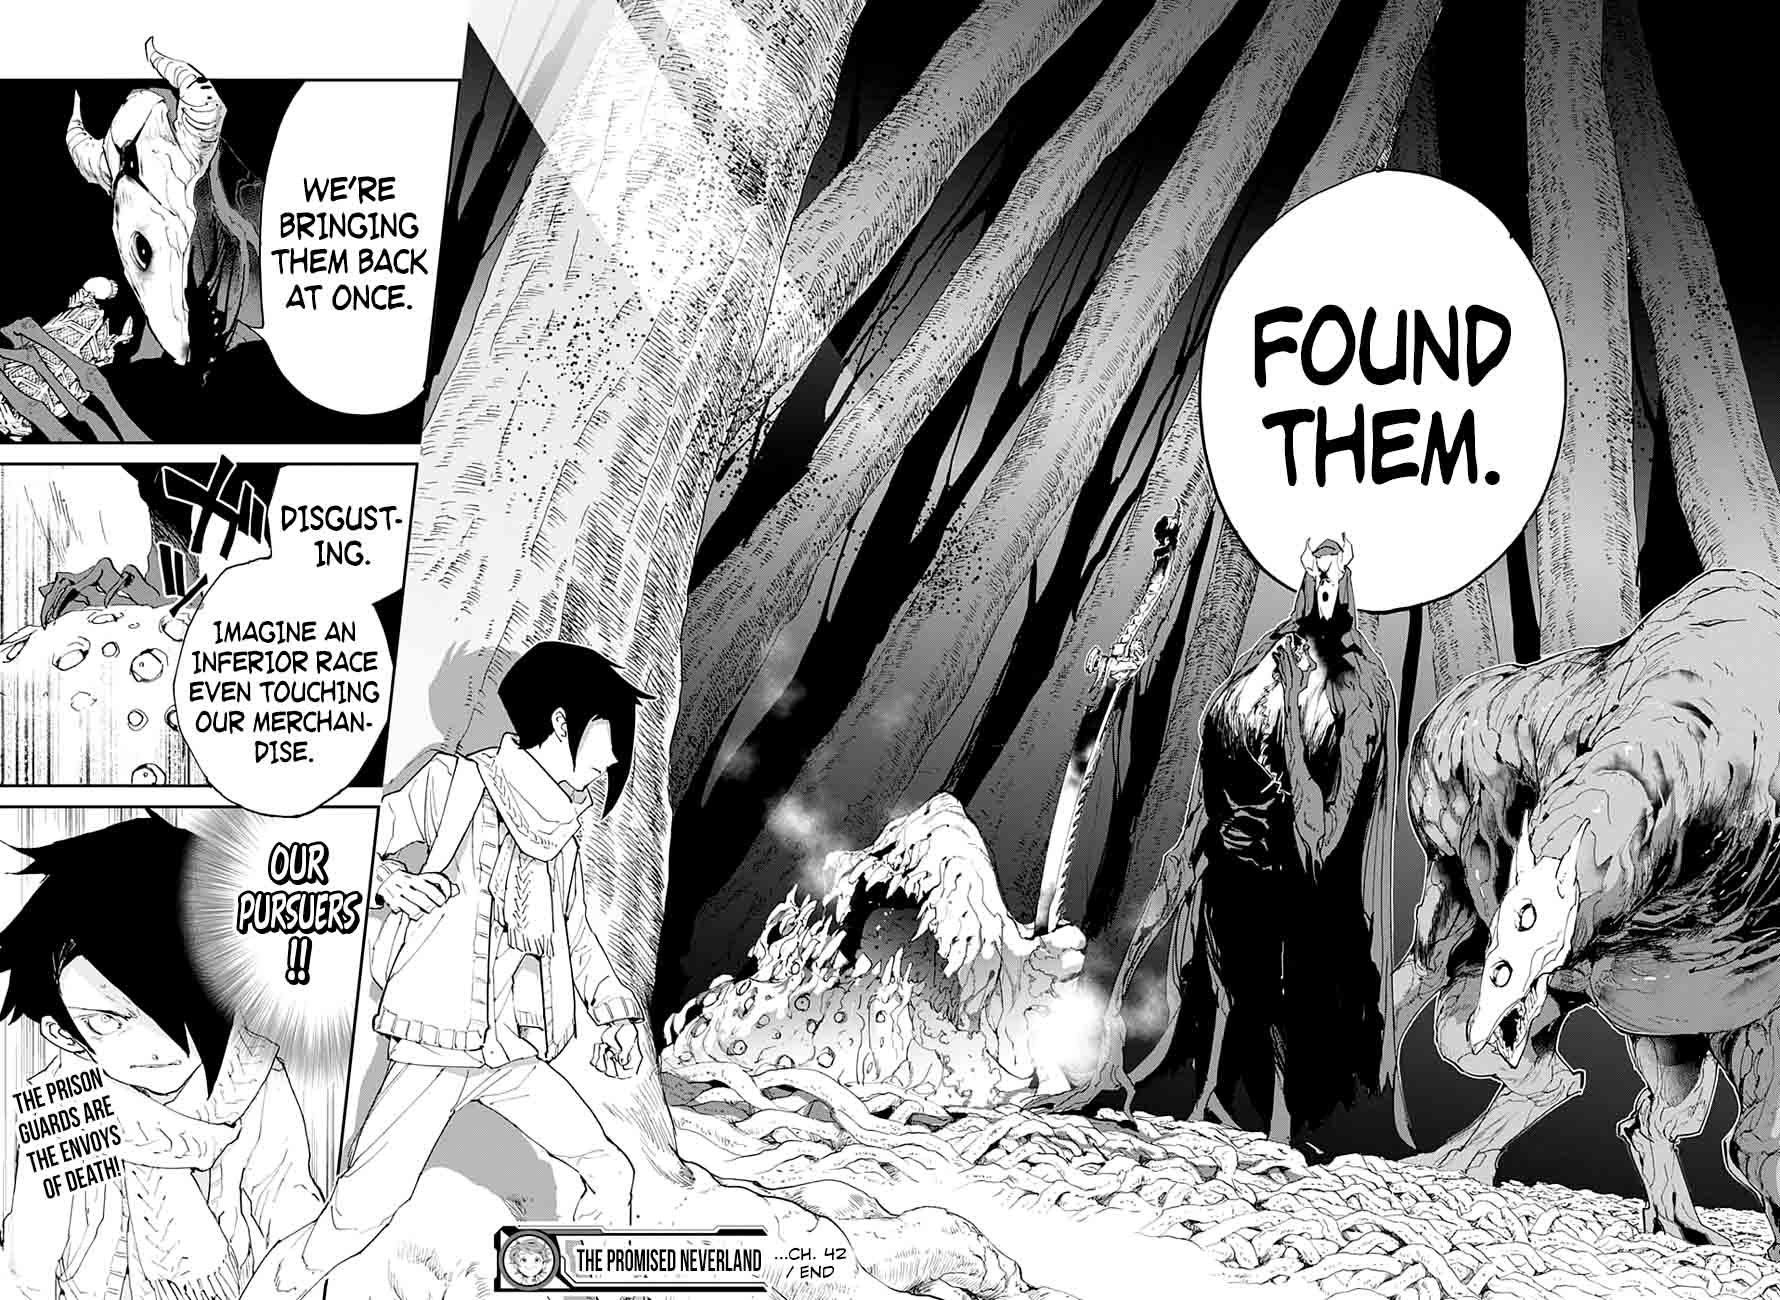 The Promised Neverland 42 19